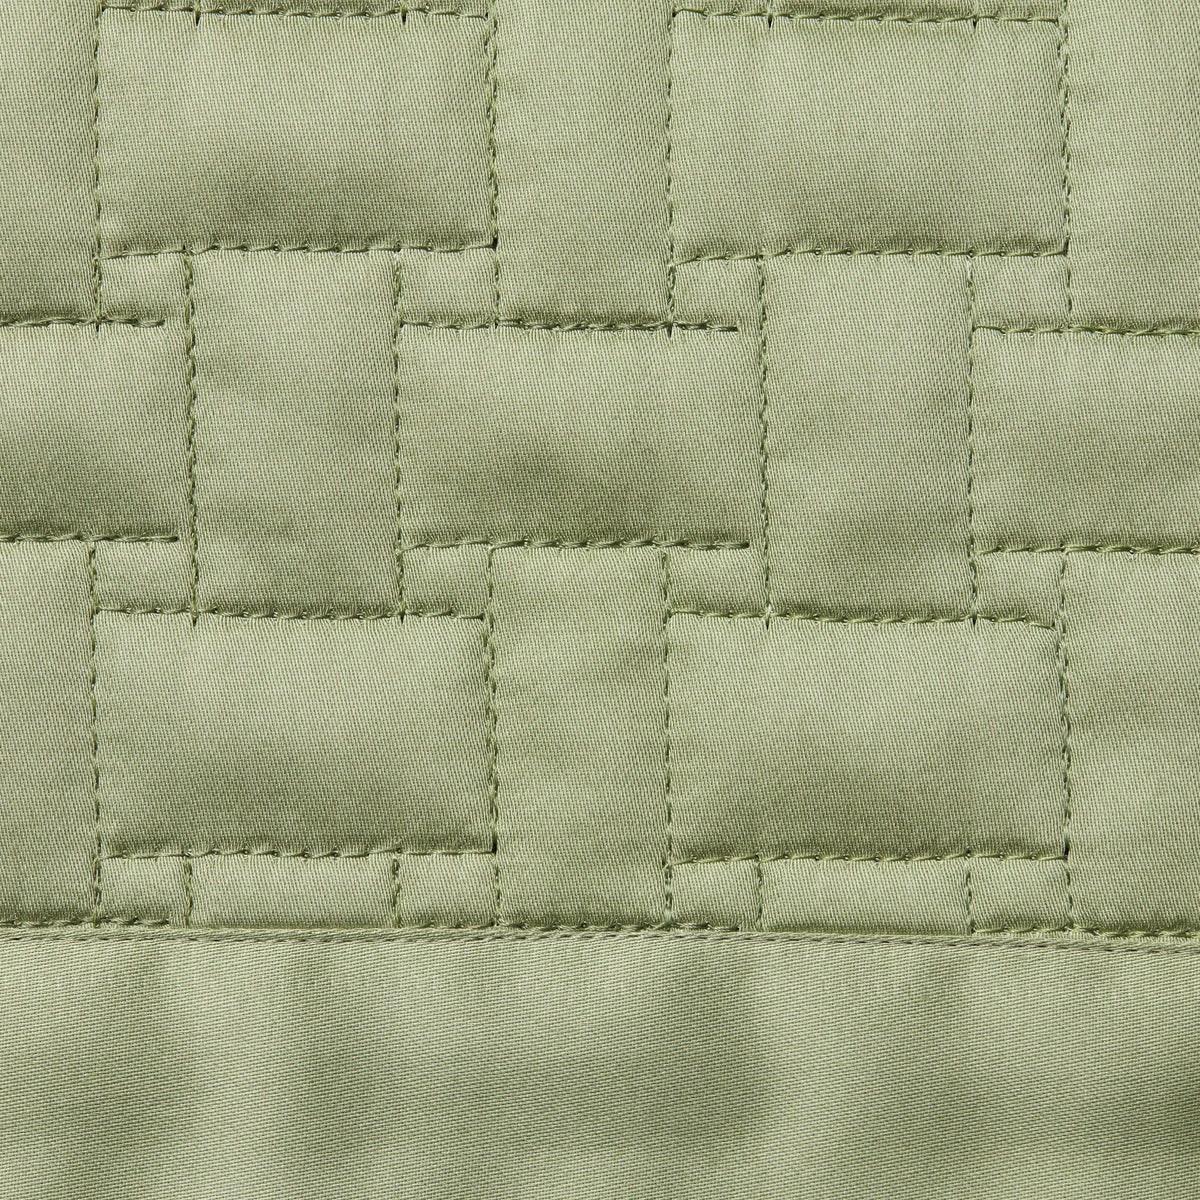 Swatch Sample of Sferra Sampietrini Quilts and Shams Willow